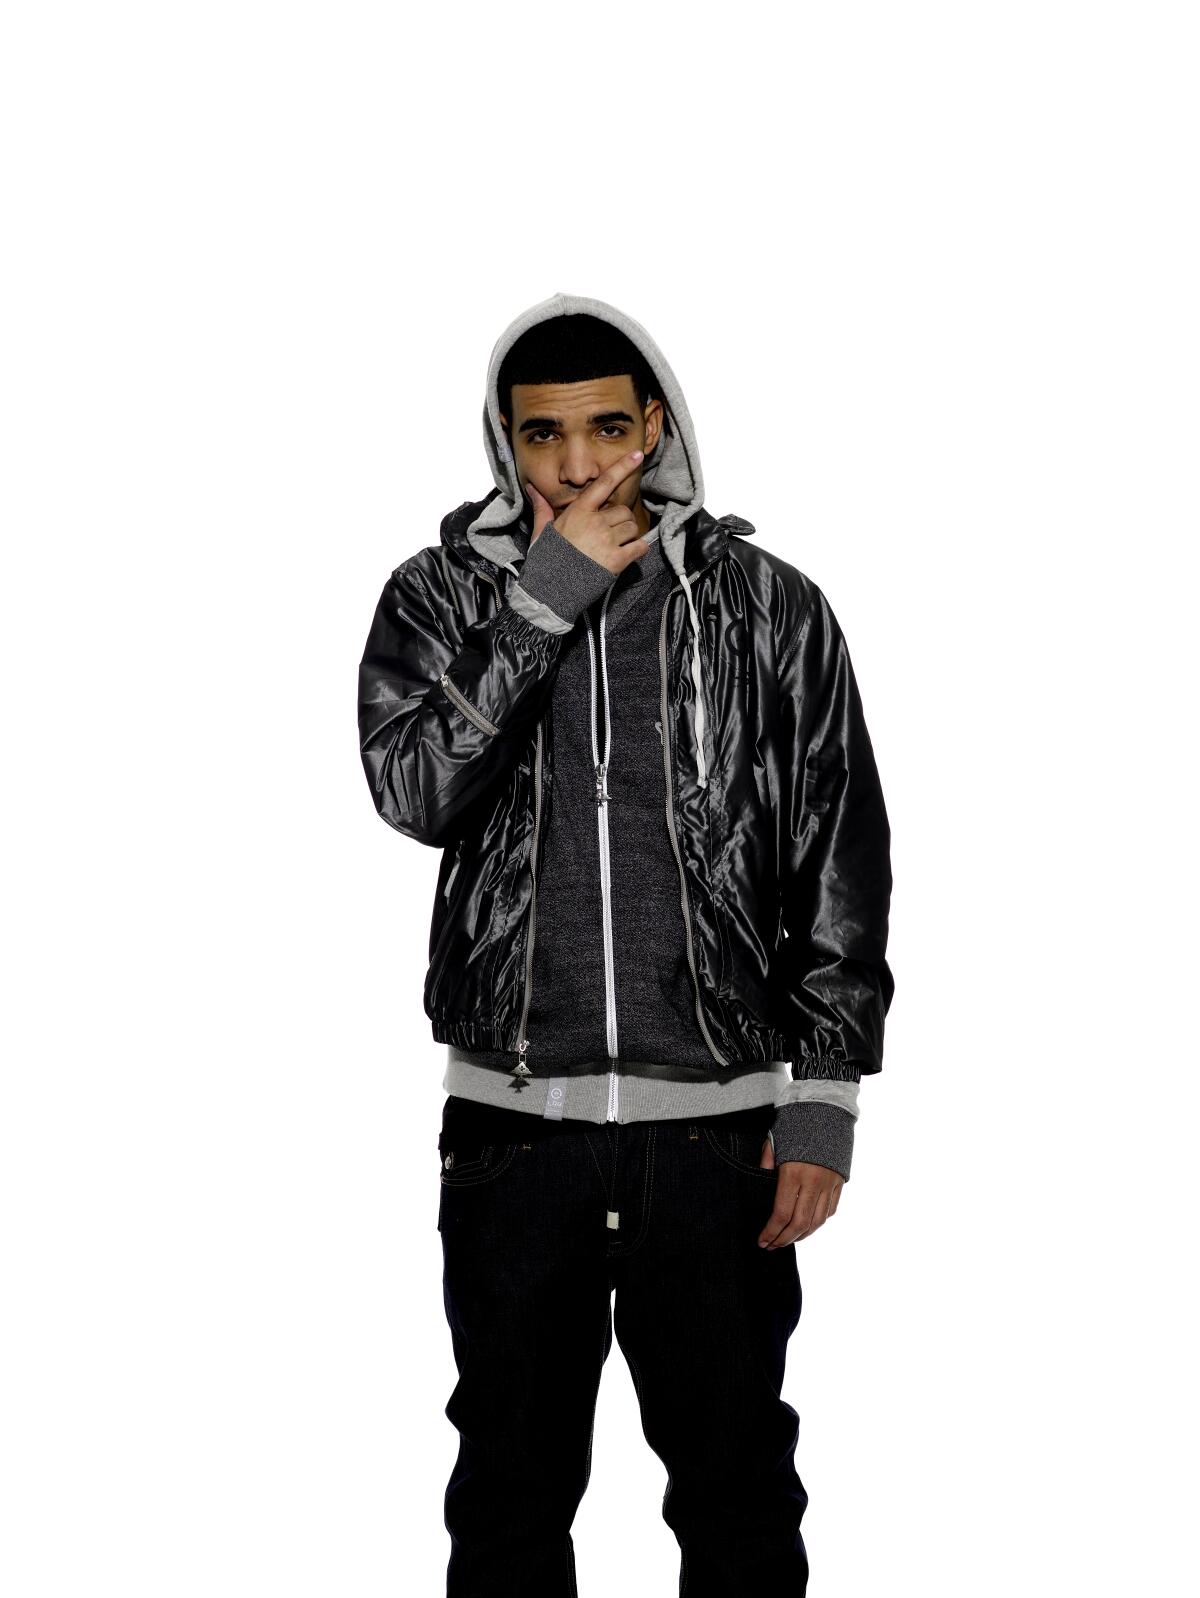 Drake, in a hoodie and jacket, stands with his hand covering his mouth.